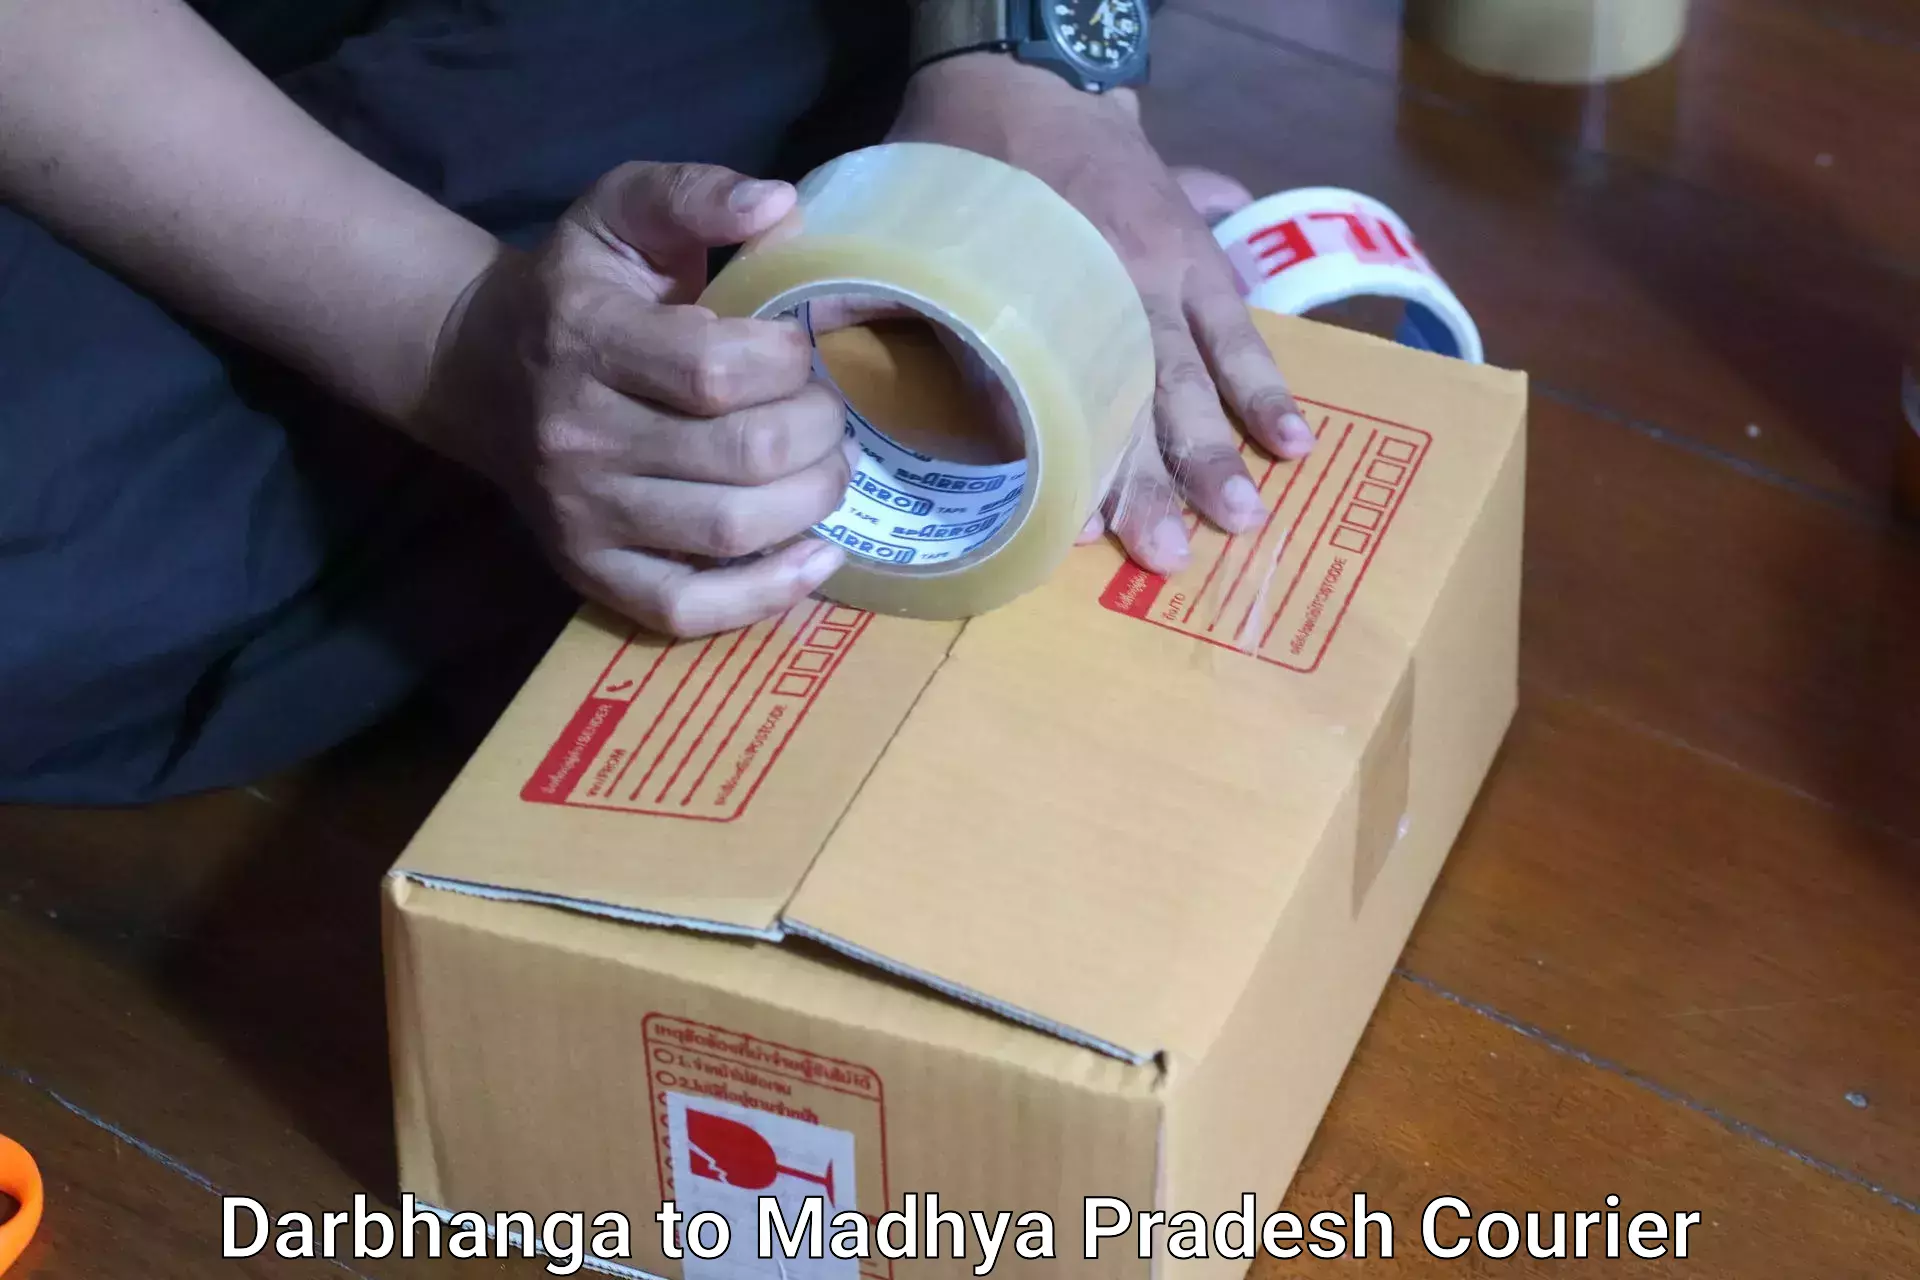 Personal effects shipping Darbhanga to Indore